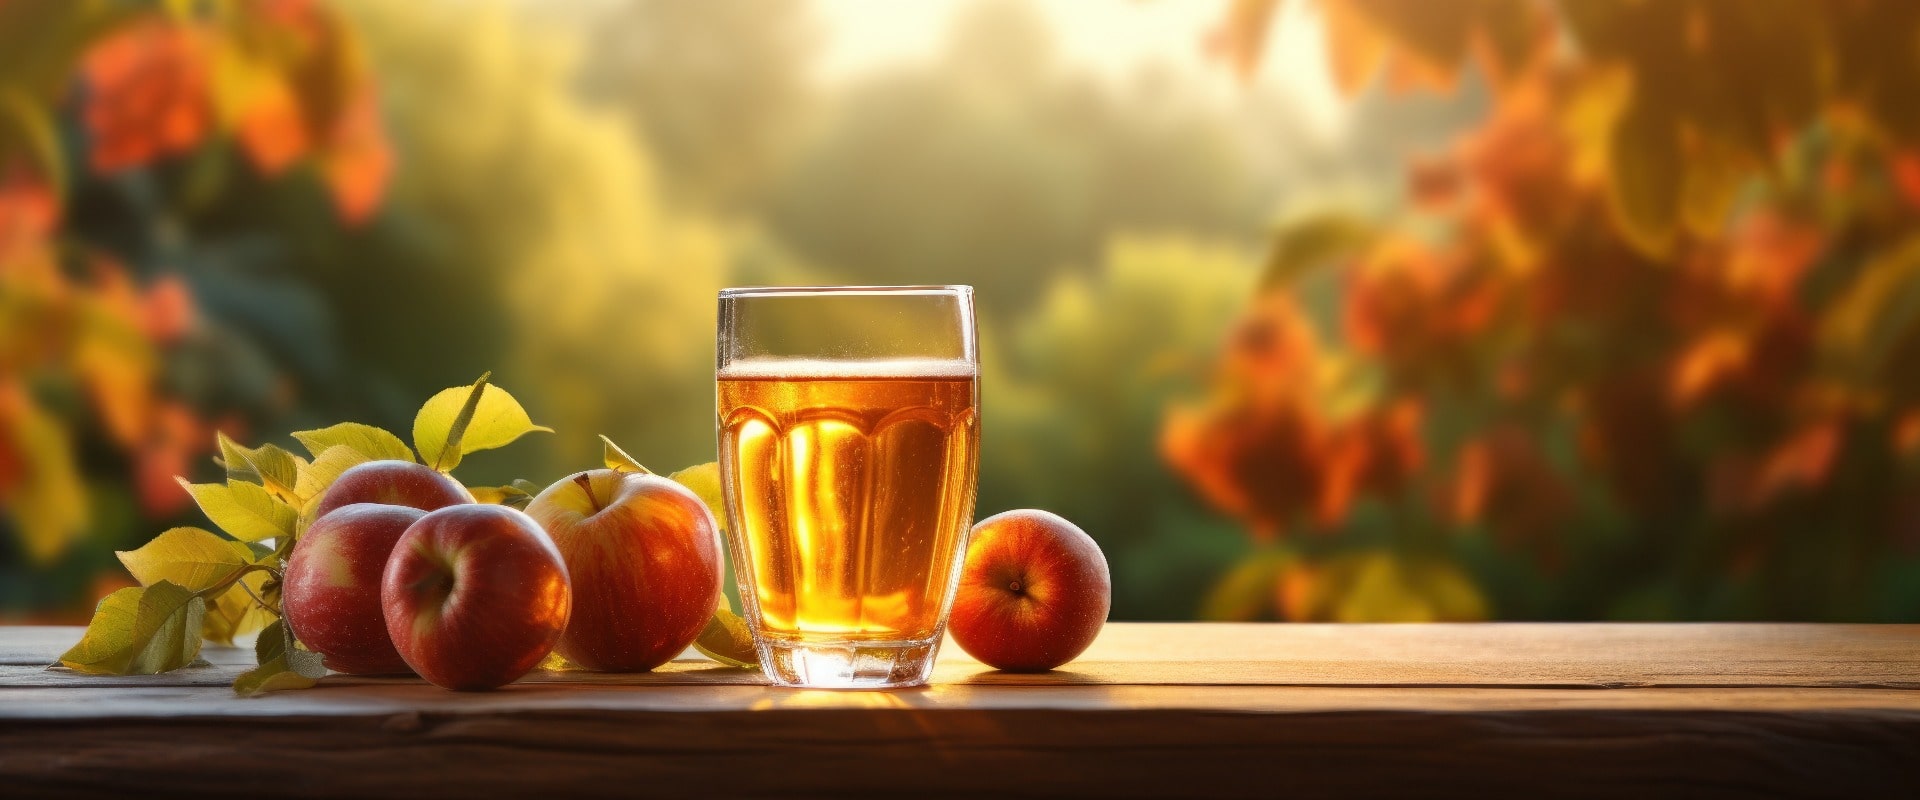 Apple cider on table with apples